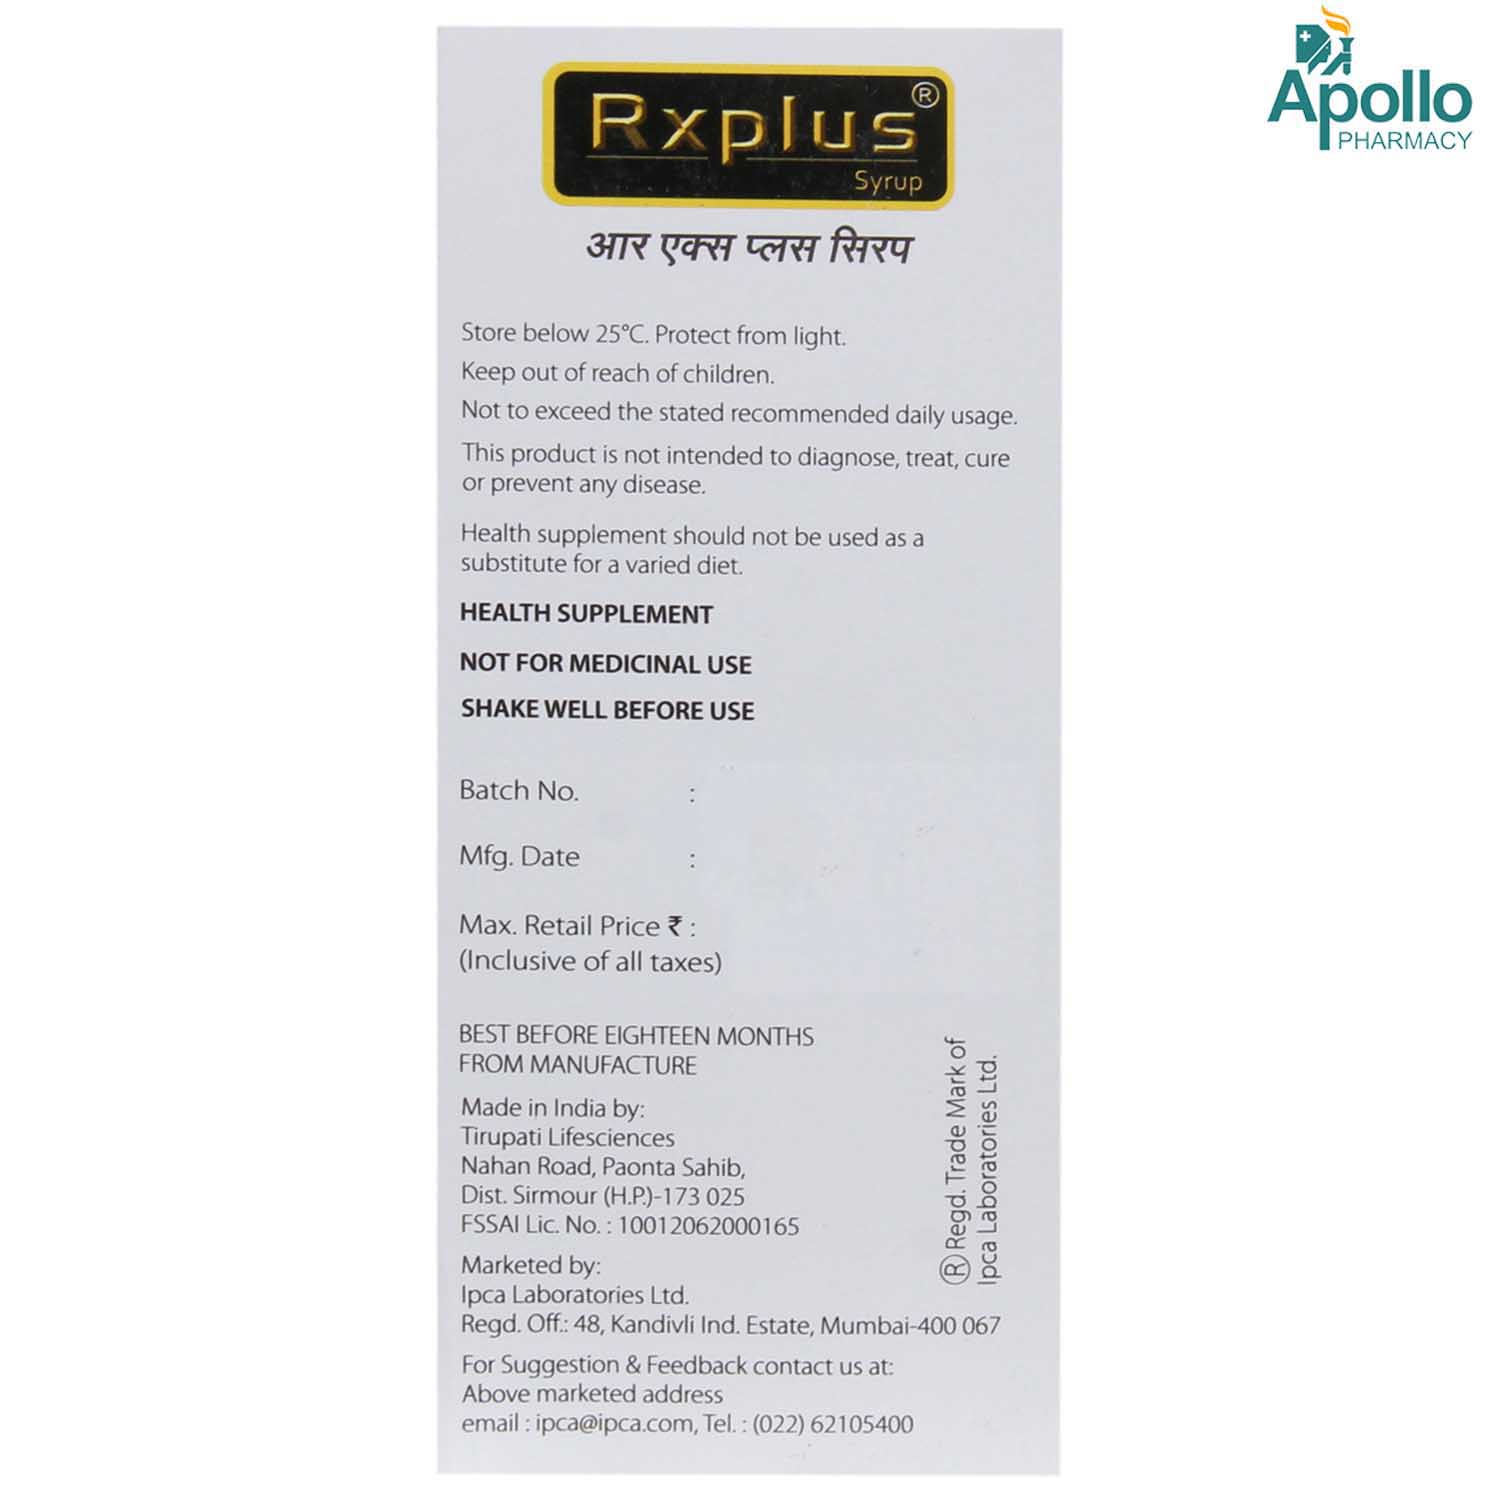 RxPlus Syrup 200 ml, Pack of 1 